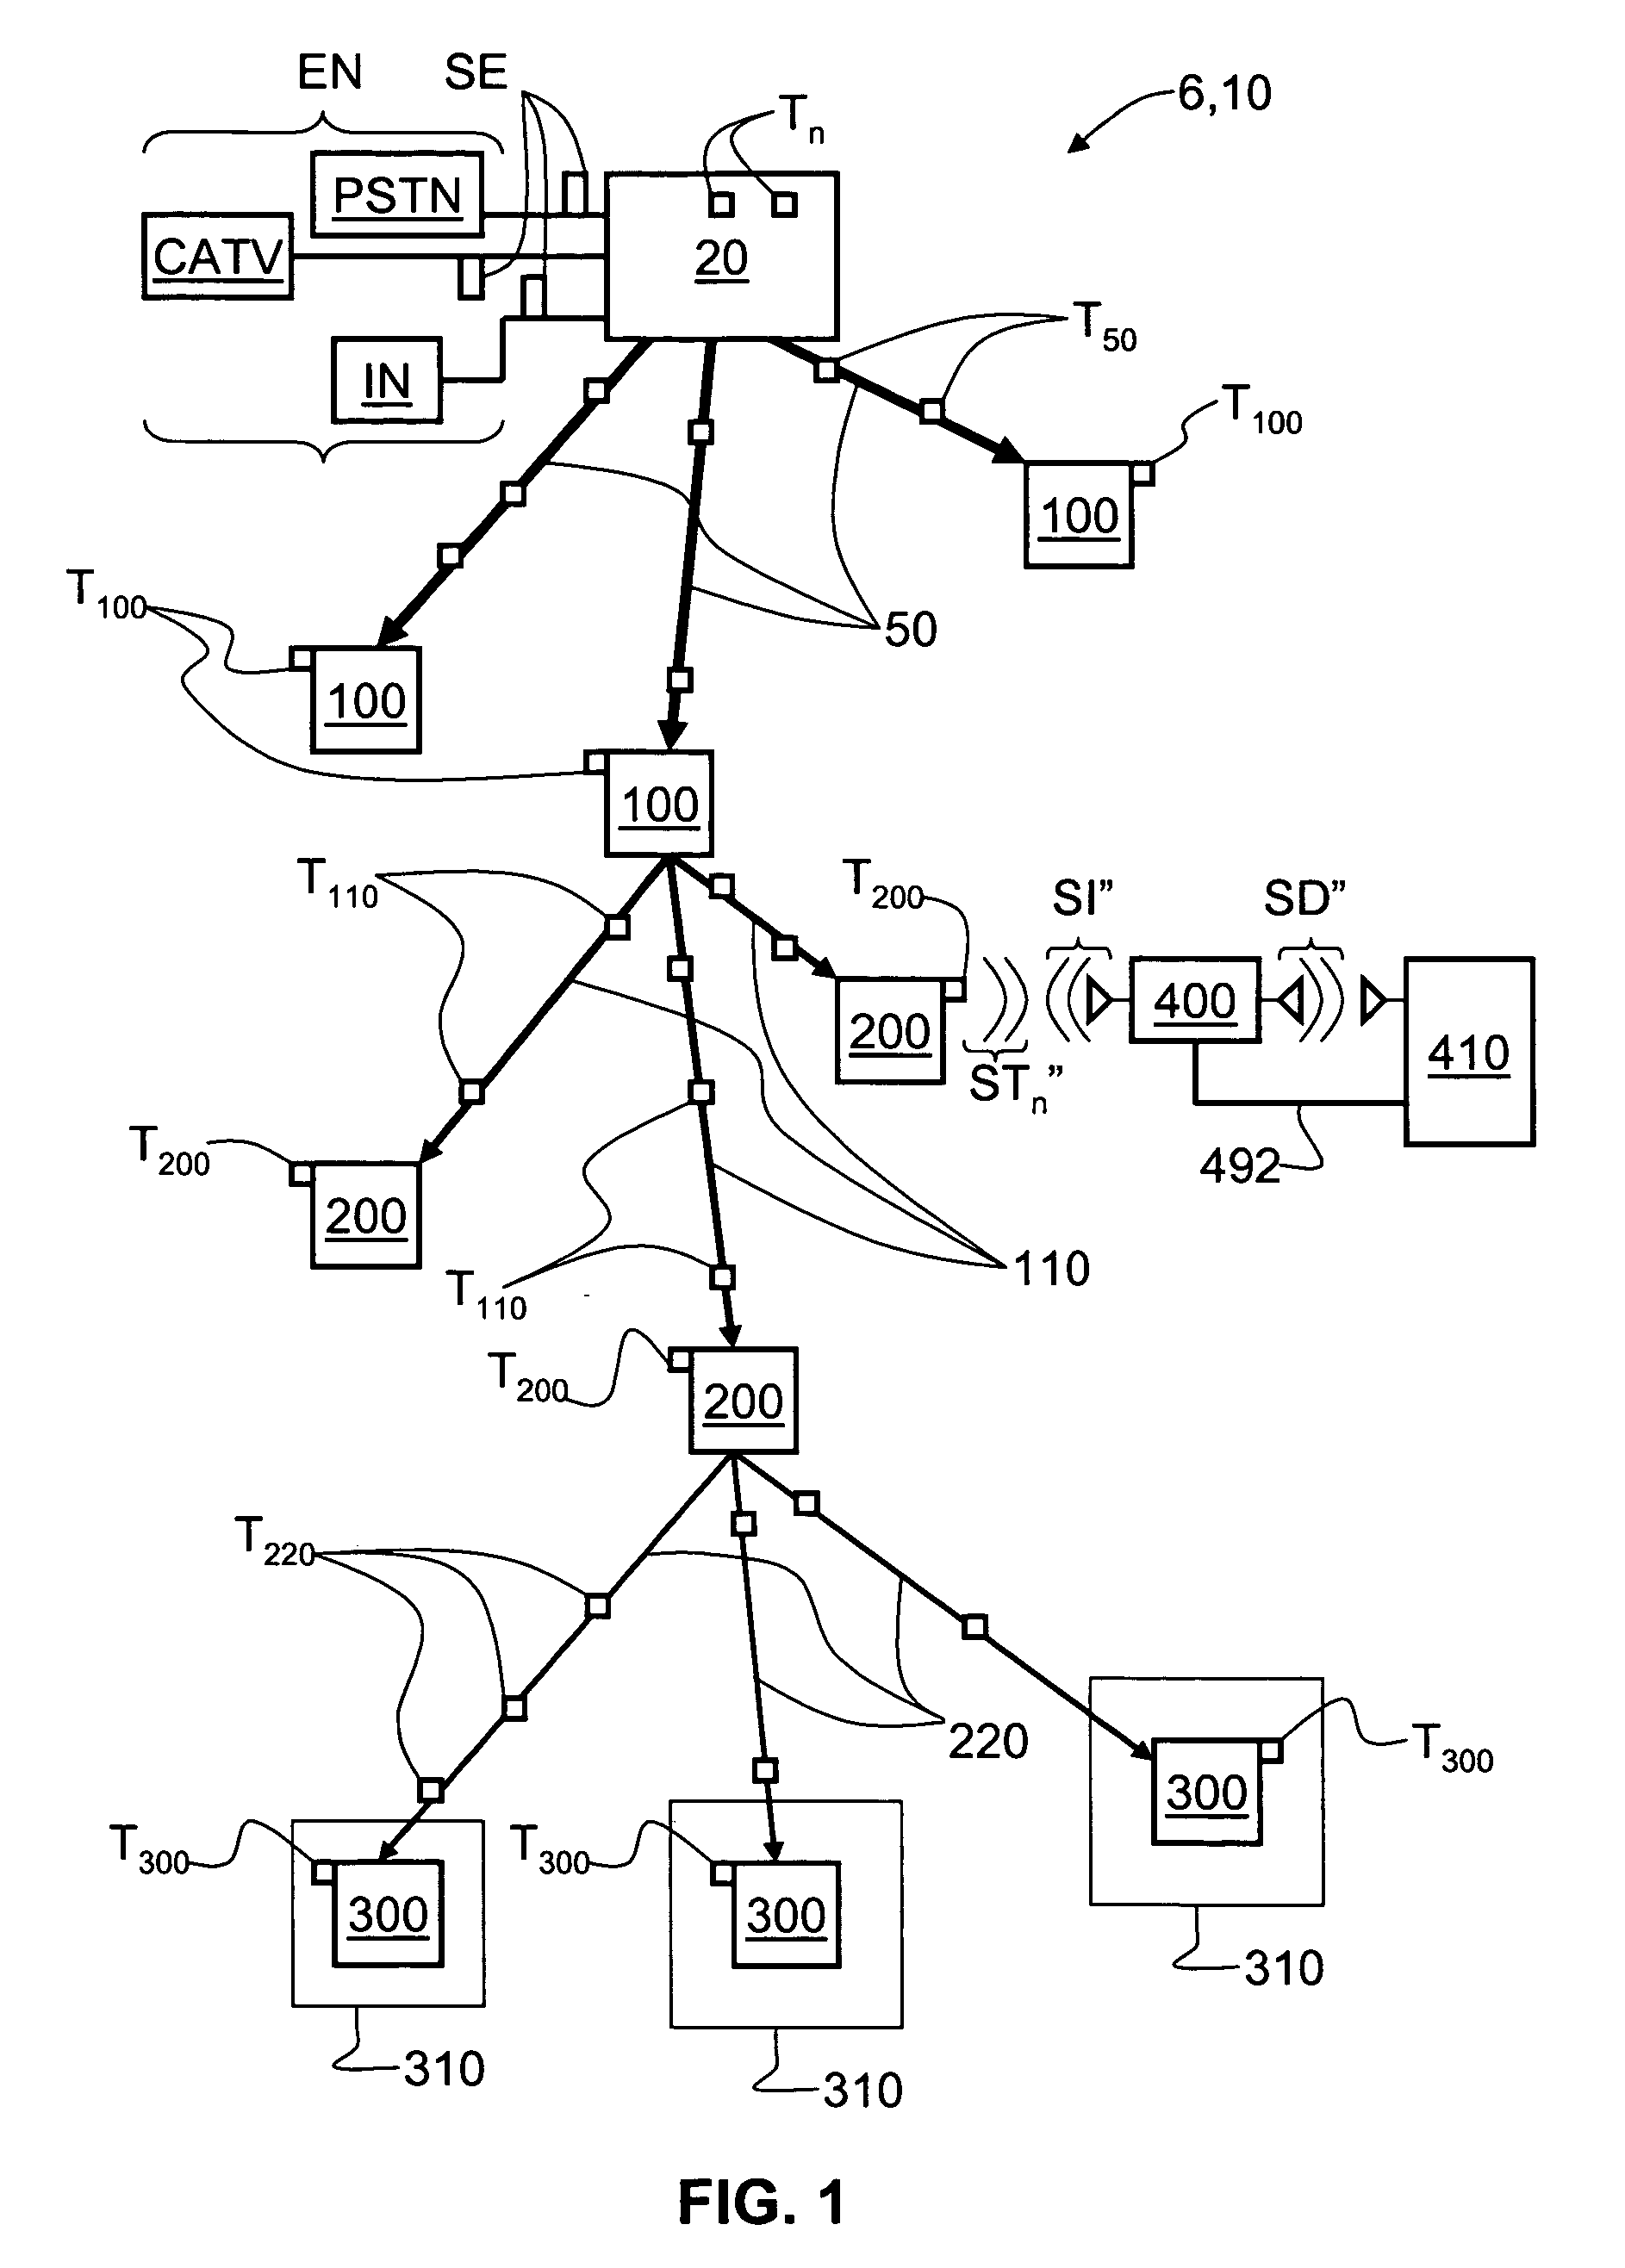 RFID systems and methods for optical fiber network deployment and maintenance